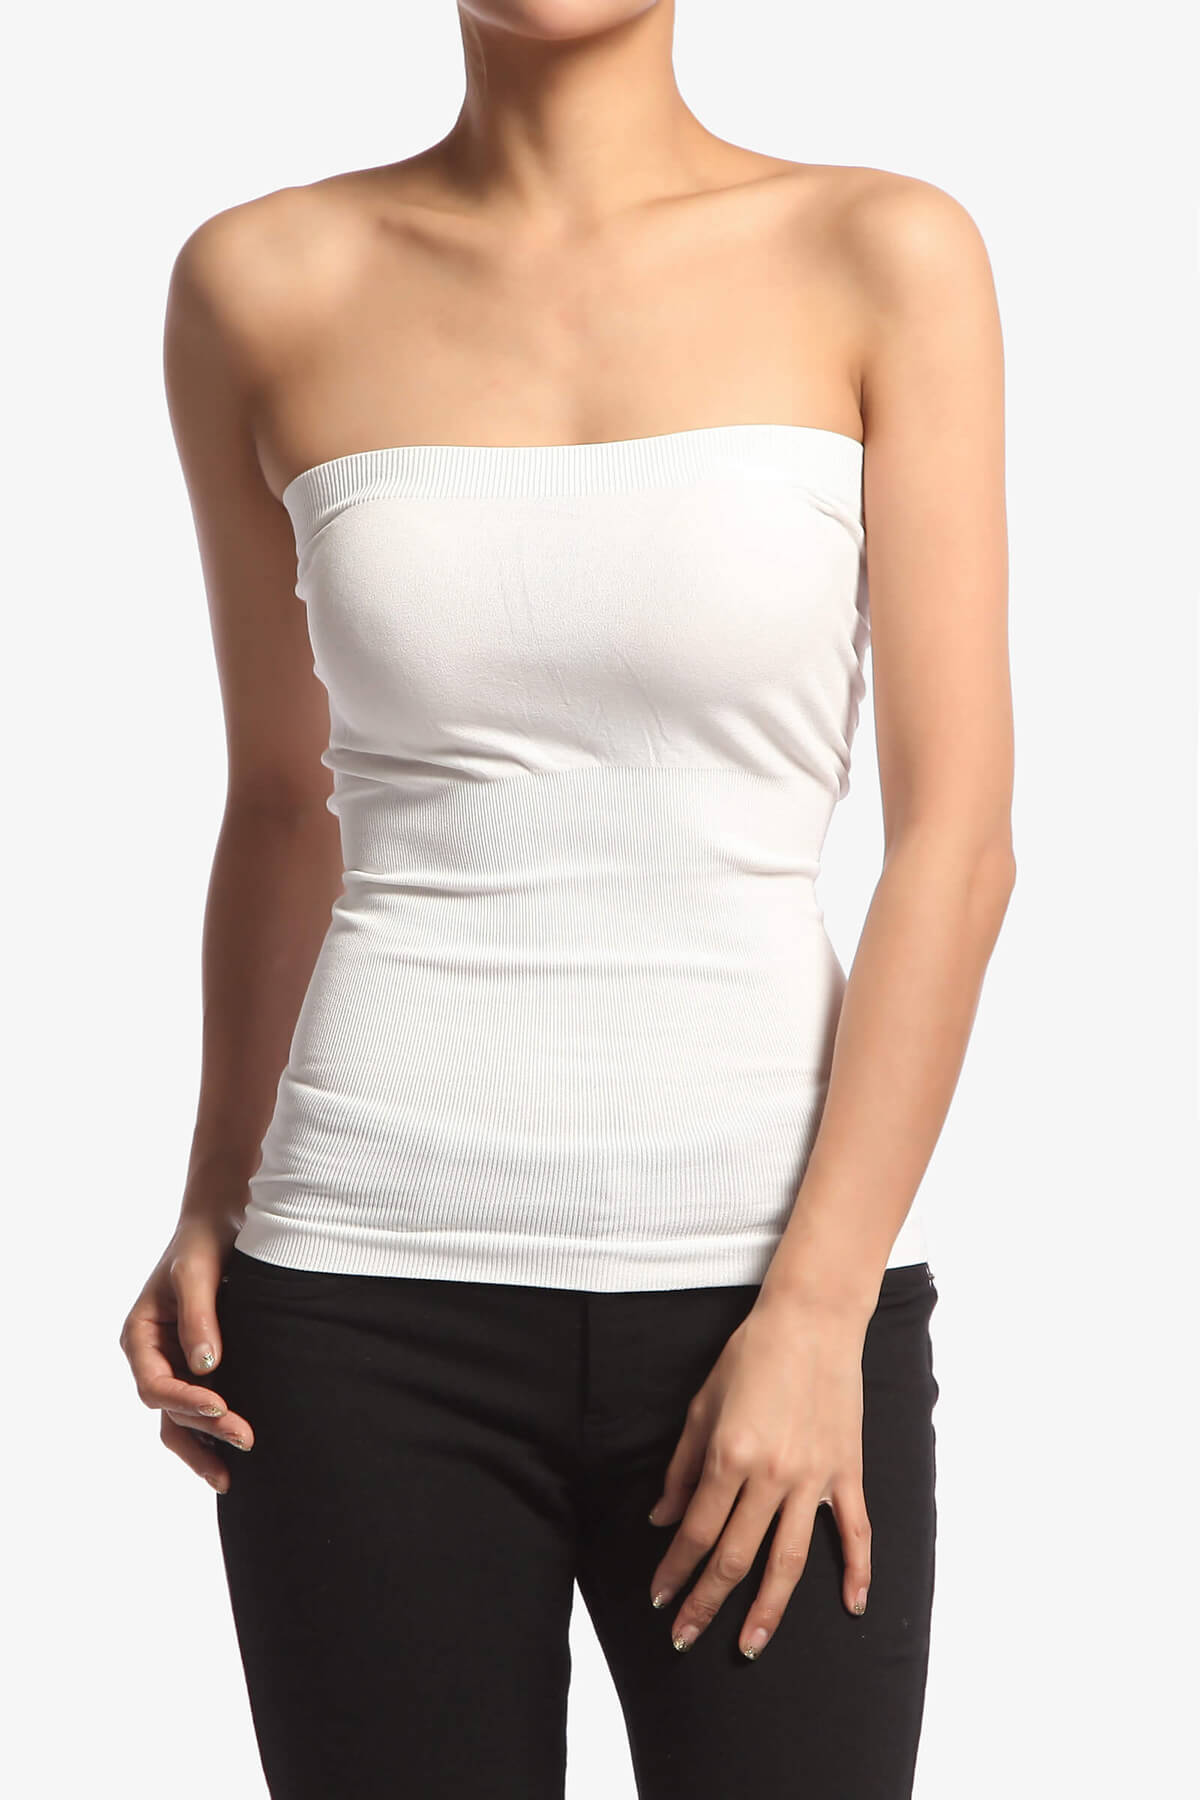 Load image into Gallery viewer, Ellenie Strapless Sealmess Tube Top WHITE_1
